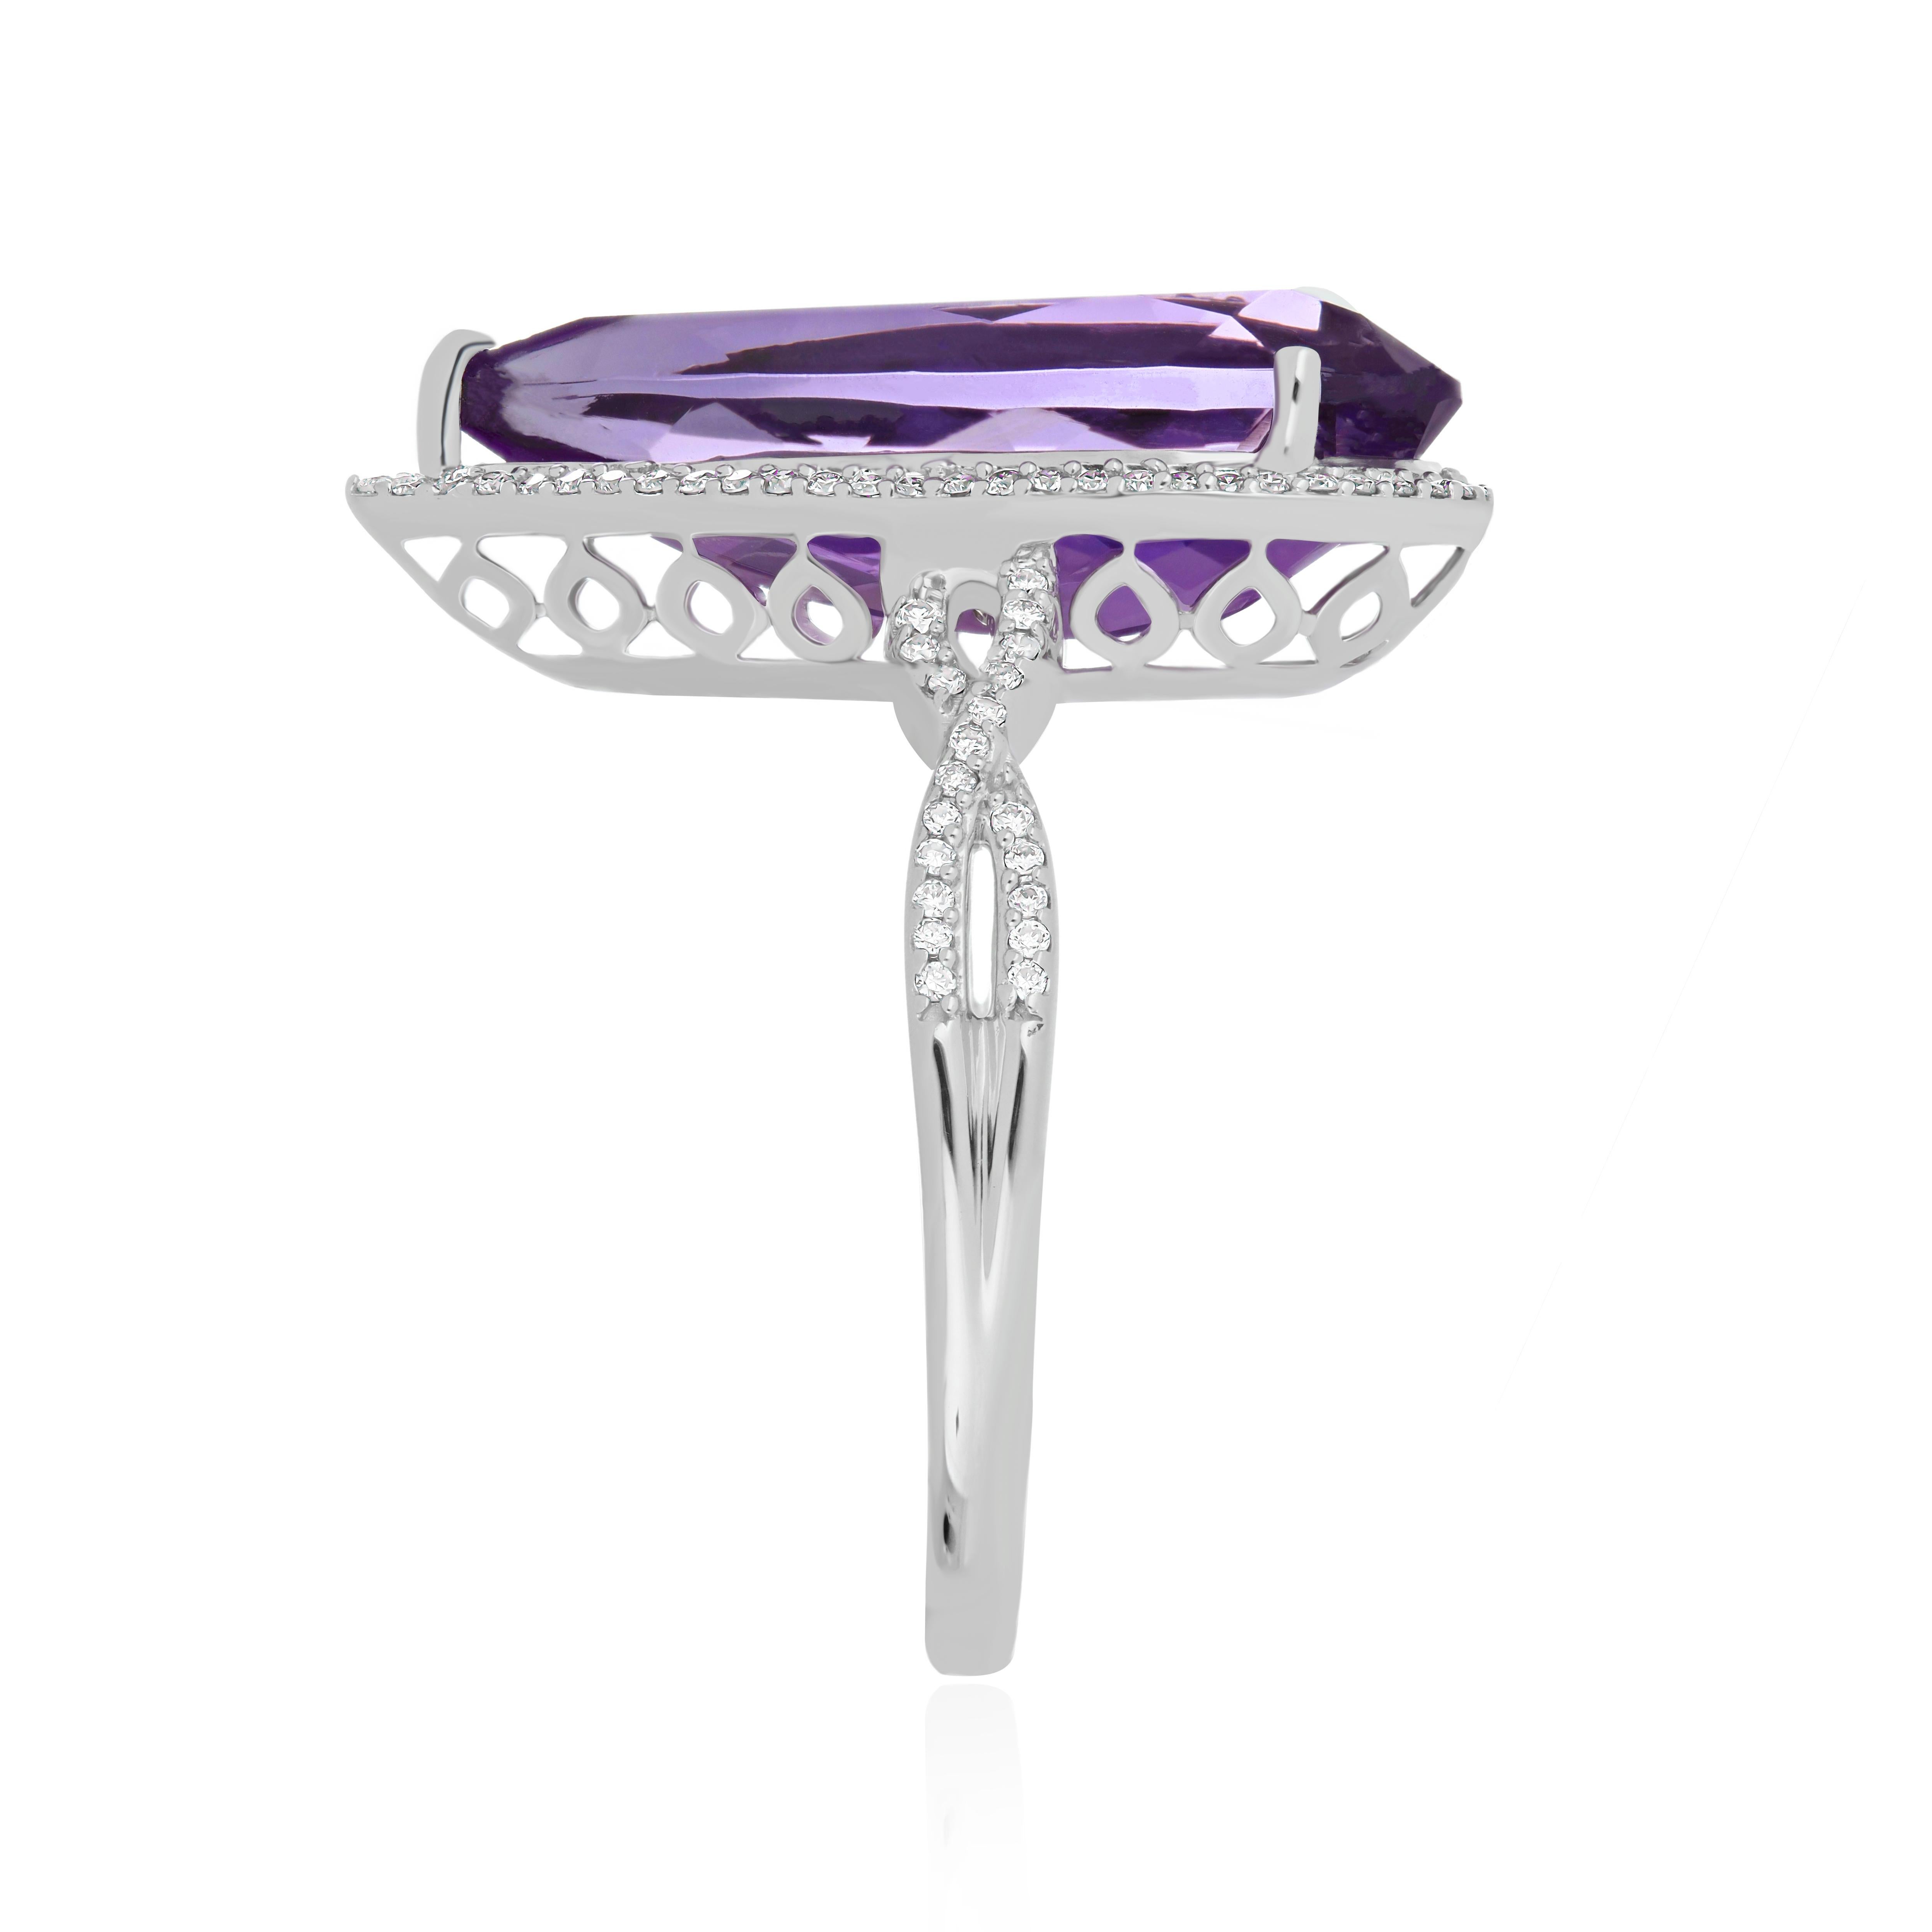 For Sale:  6.11 Carat Amethyst and Diamond Ring in 14 Karat White Gold Ring  4